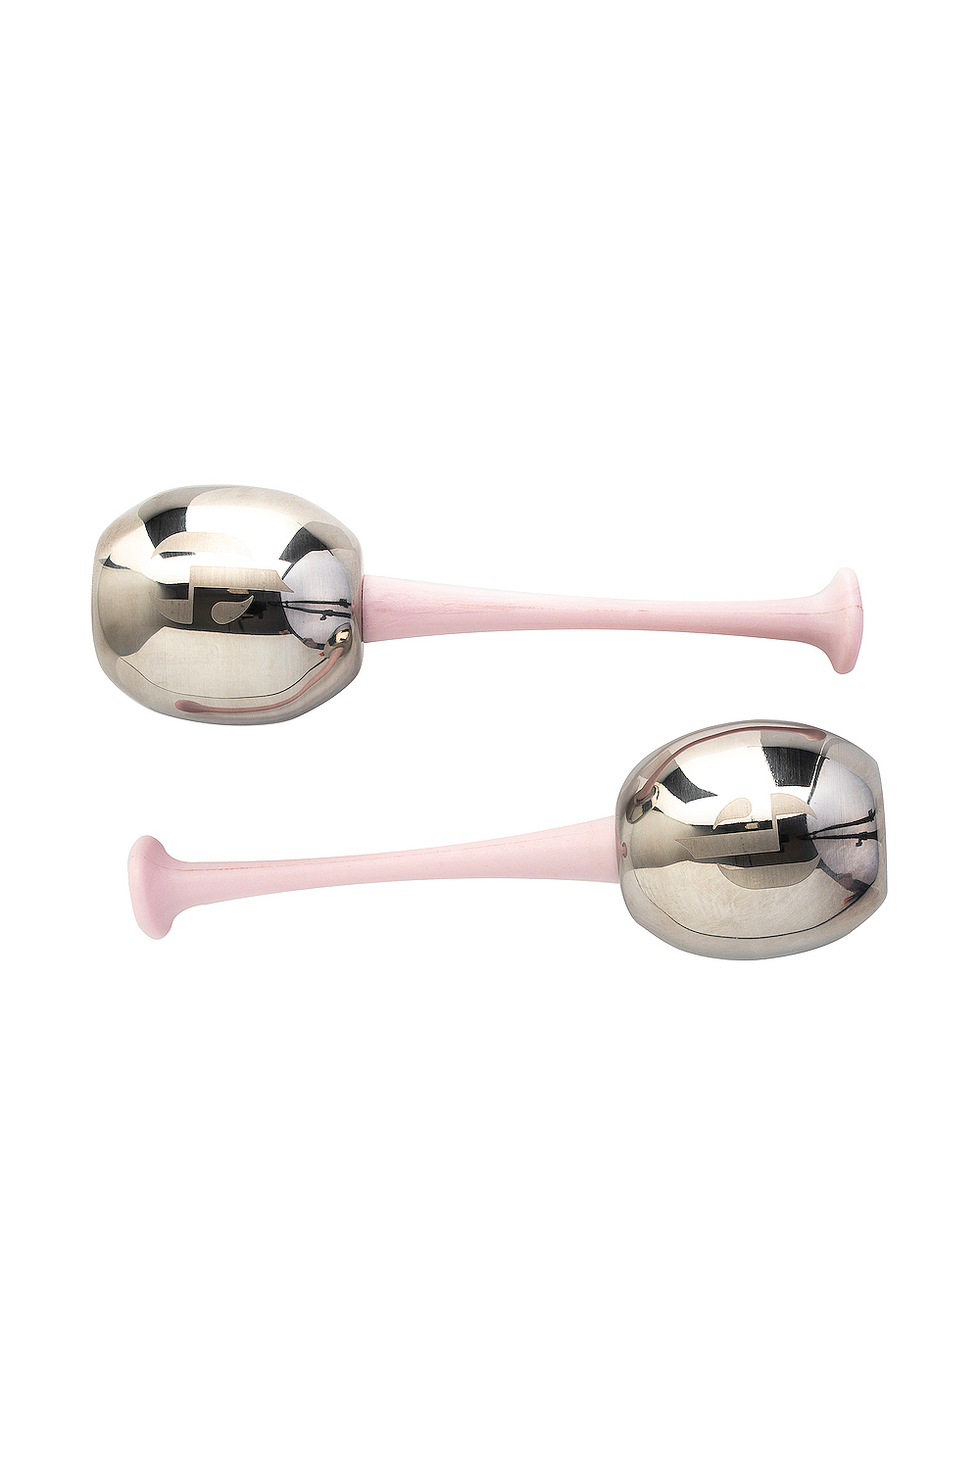 10 Best Face Massagers of 2022 for Every Skin Type and Concern